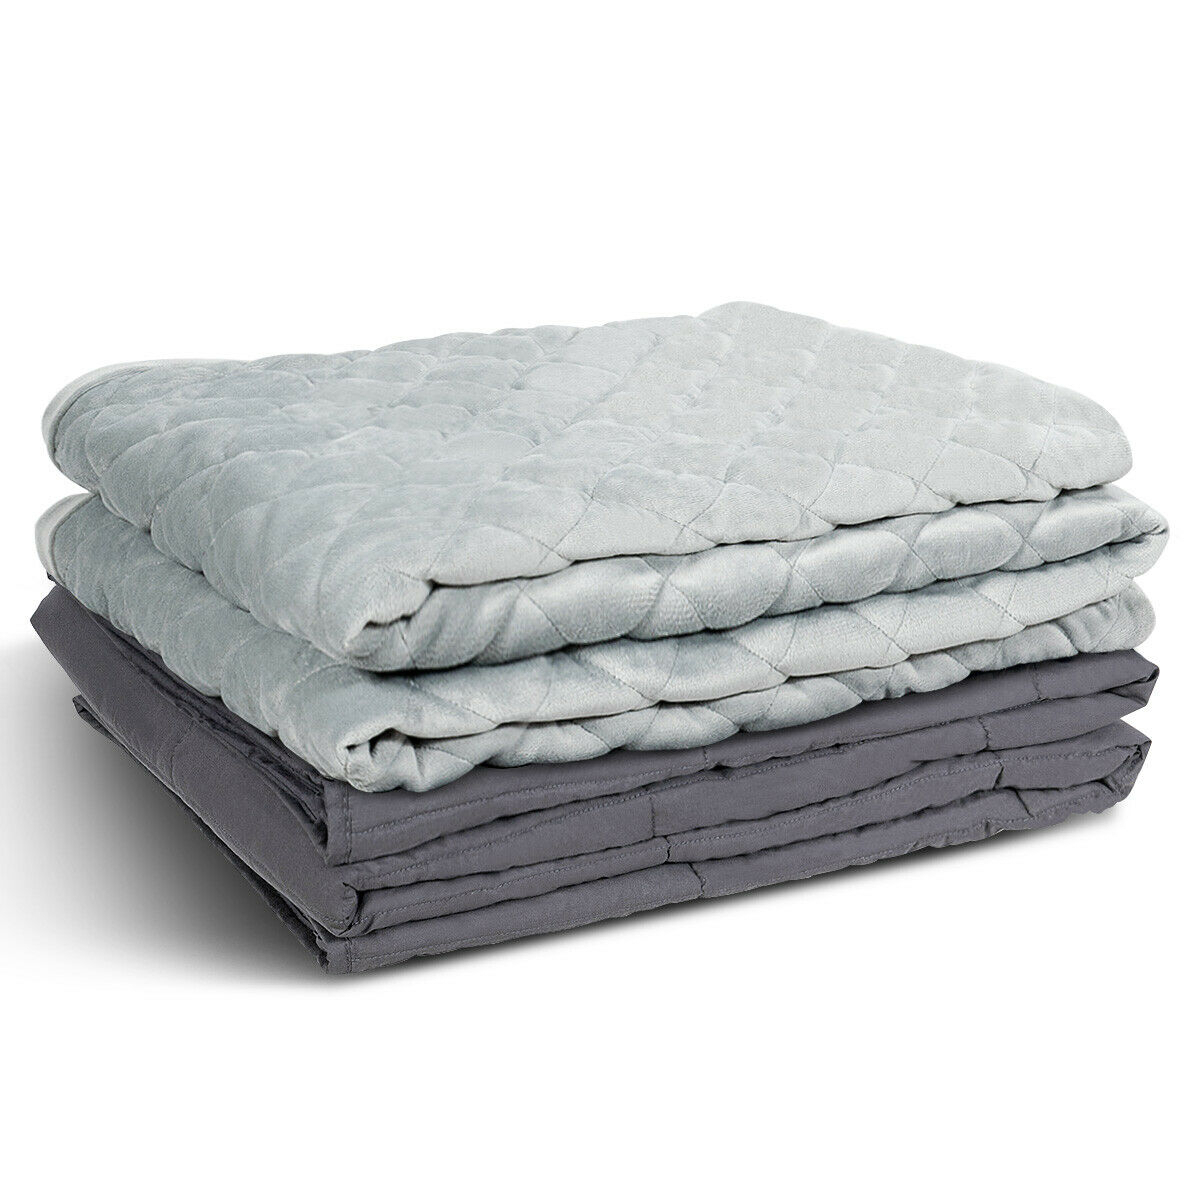 48x72 15lbs/20lbs Queen/King Size Weighted Blanket Soft Cotton Quilt W/ Carrying Bag - 48x72 15lbs